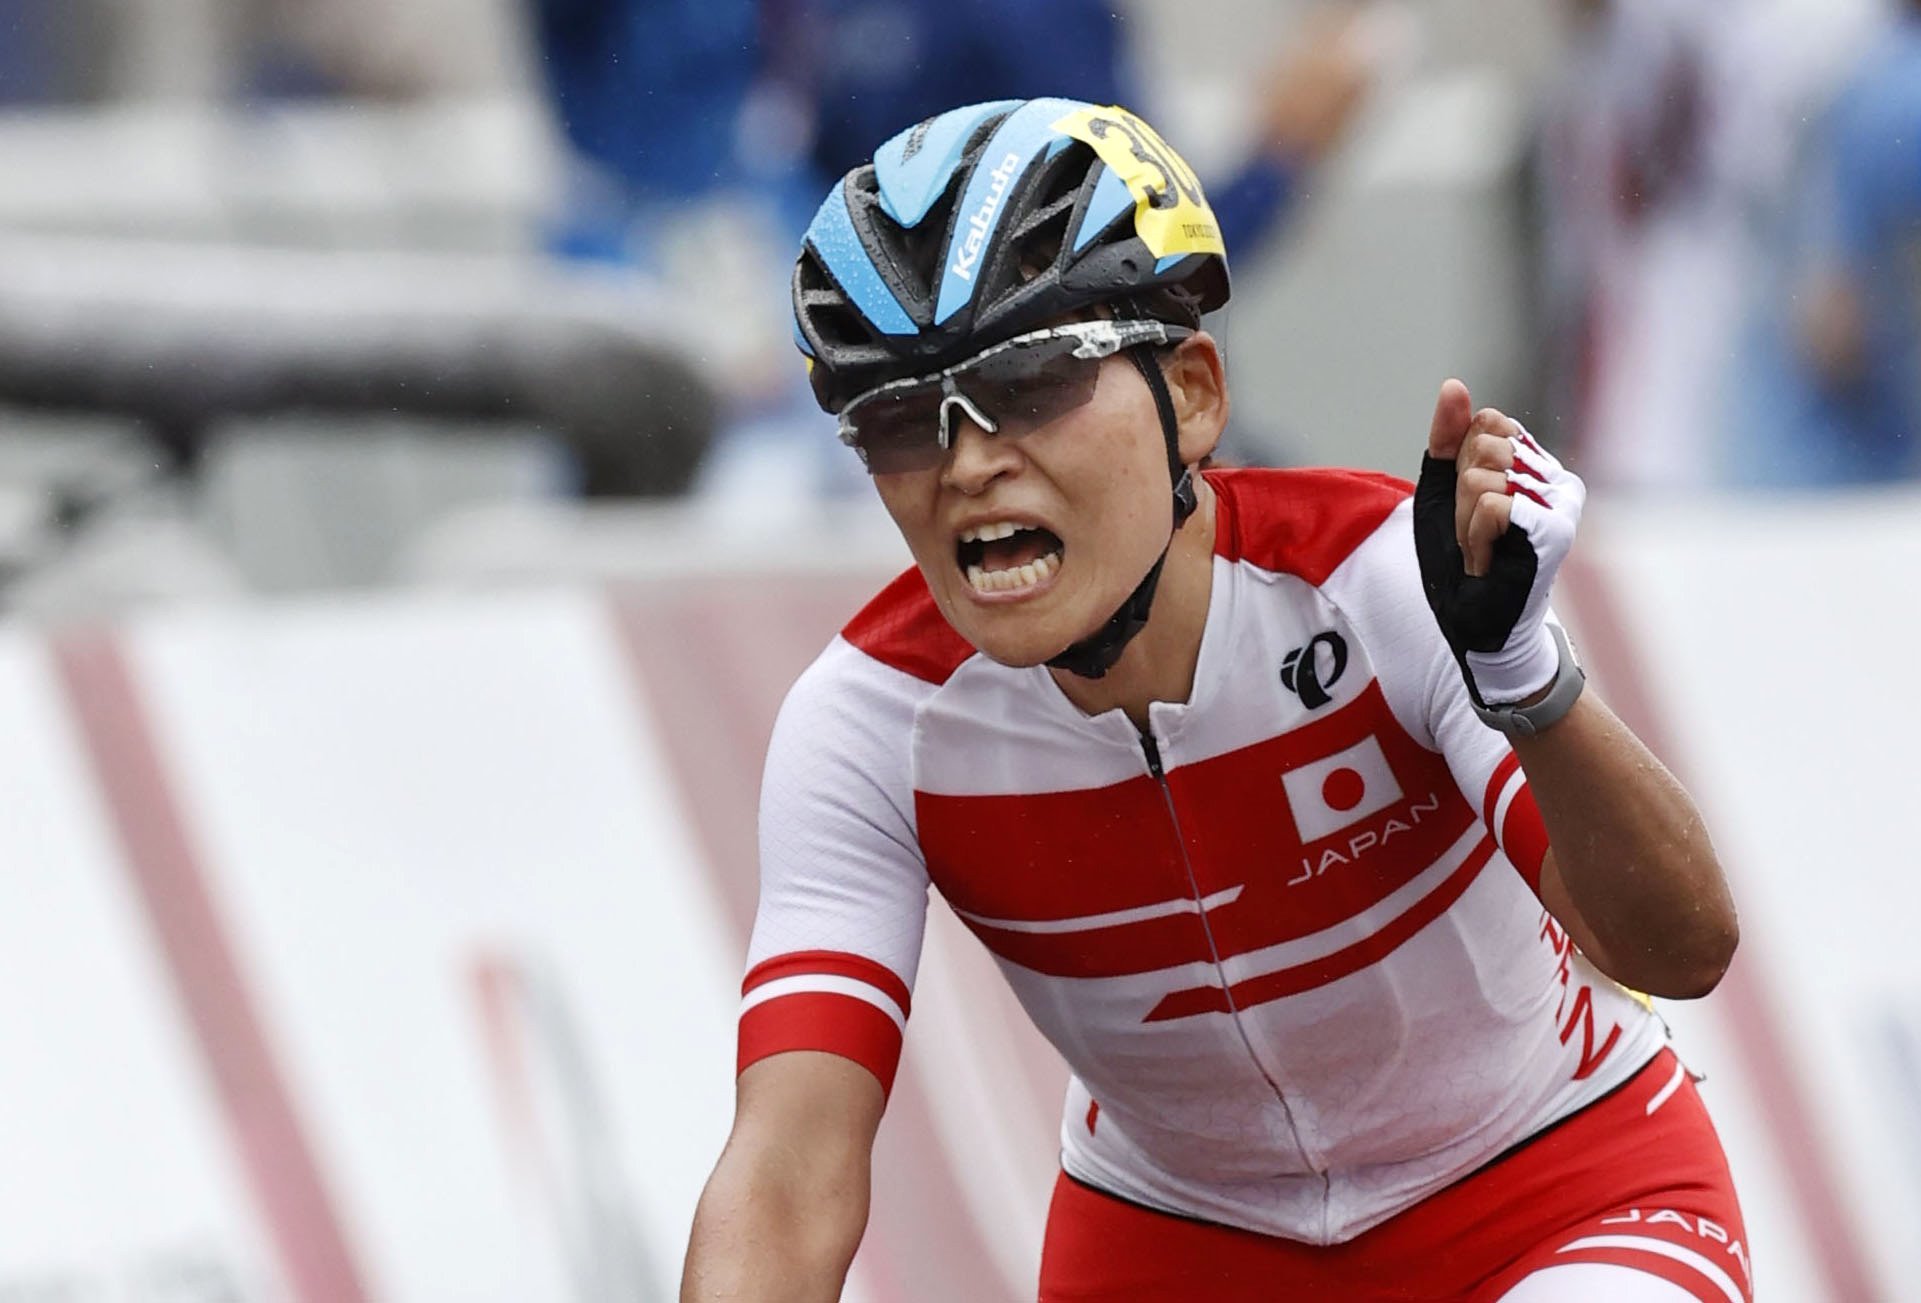 Fist clenched, close up of Keiko Sugiura cycling to gold